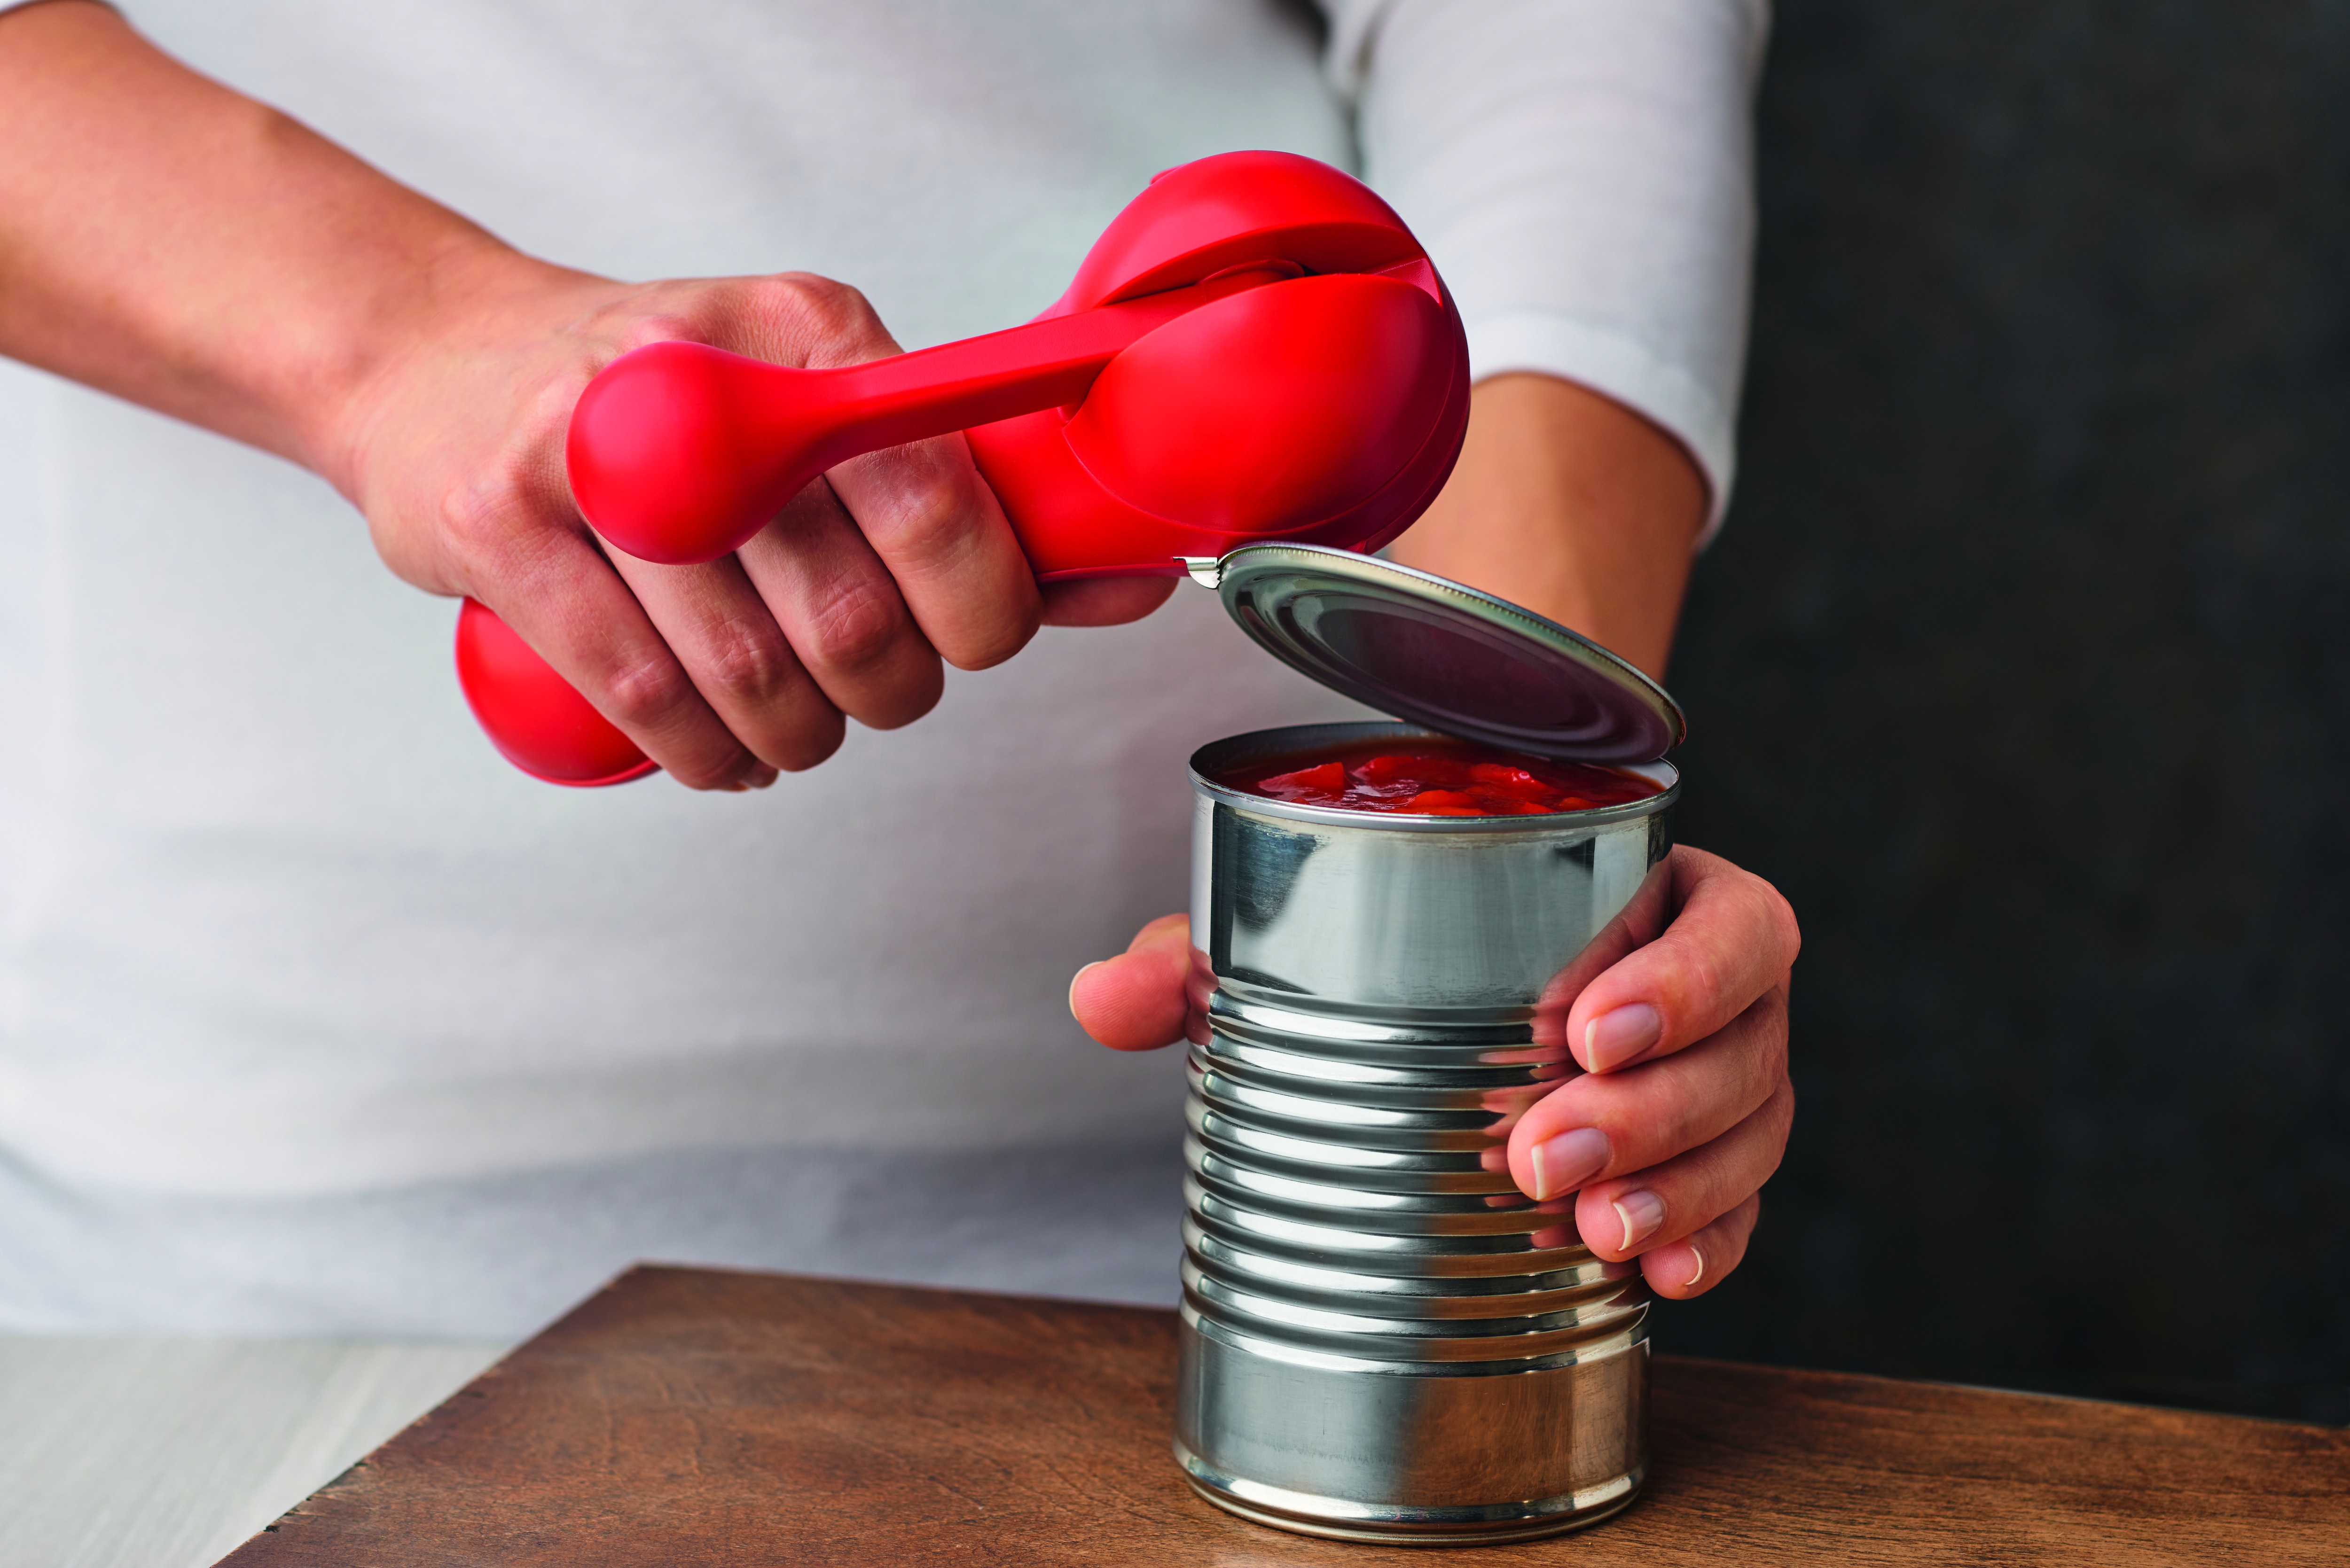 Open Cans and Pop Tabs Easily Using the Ratchet Safety LidLifter